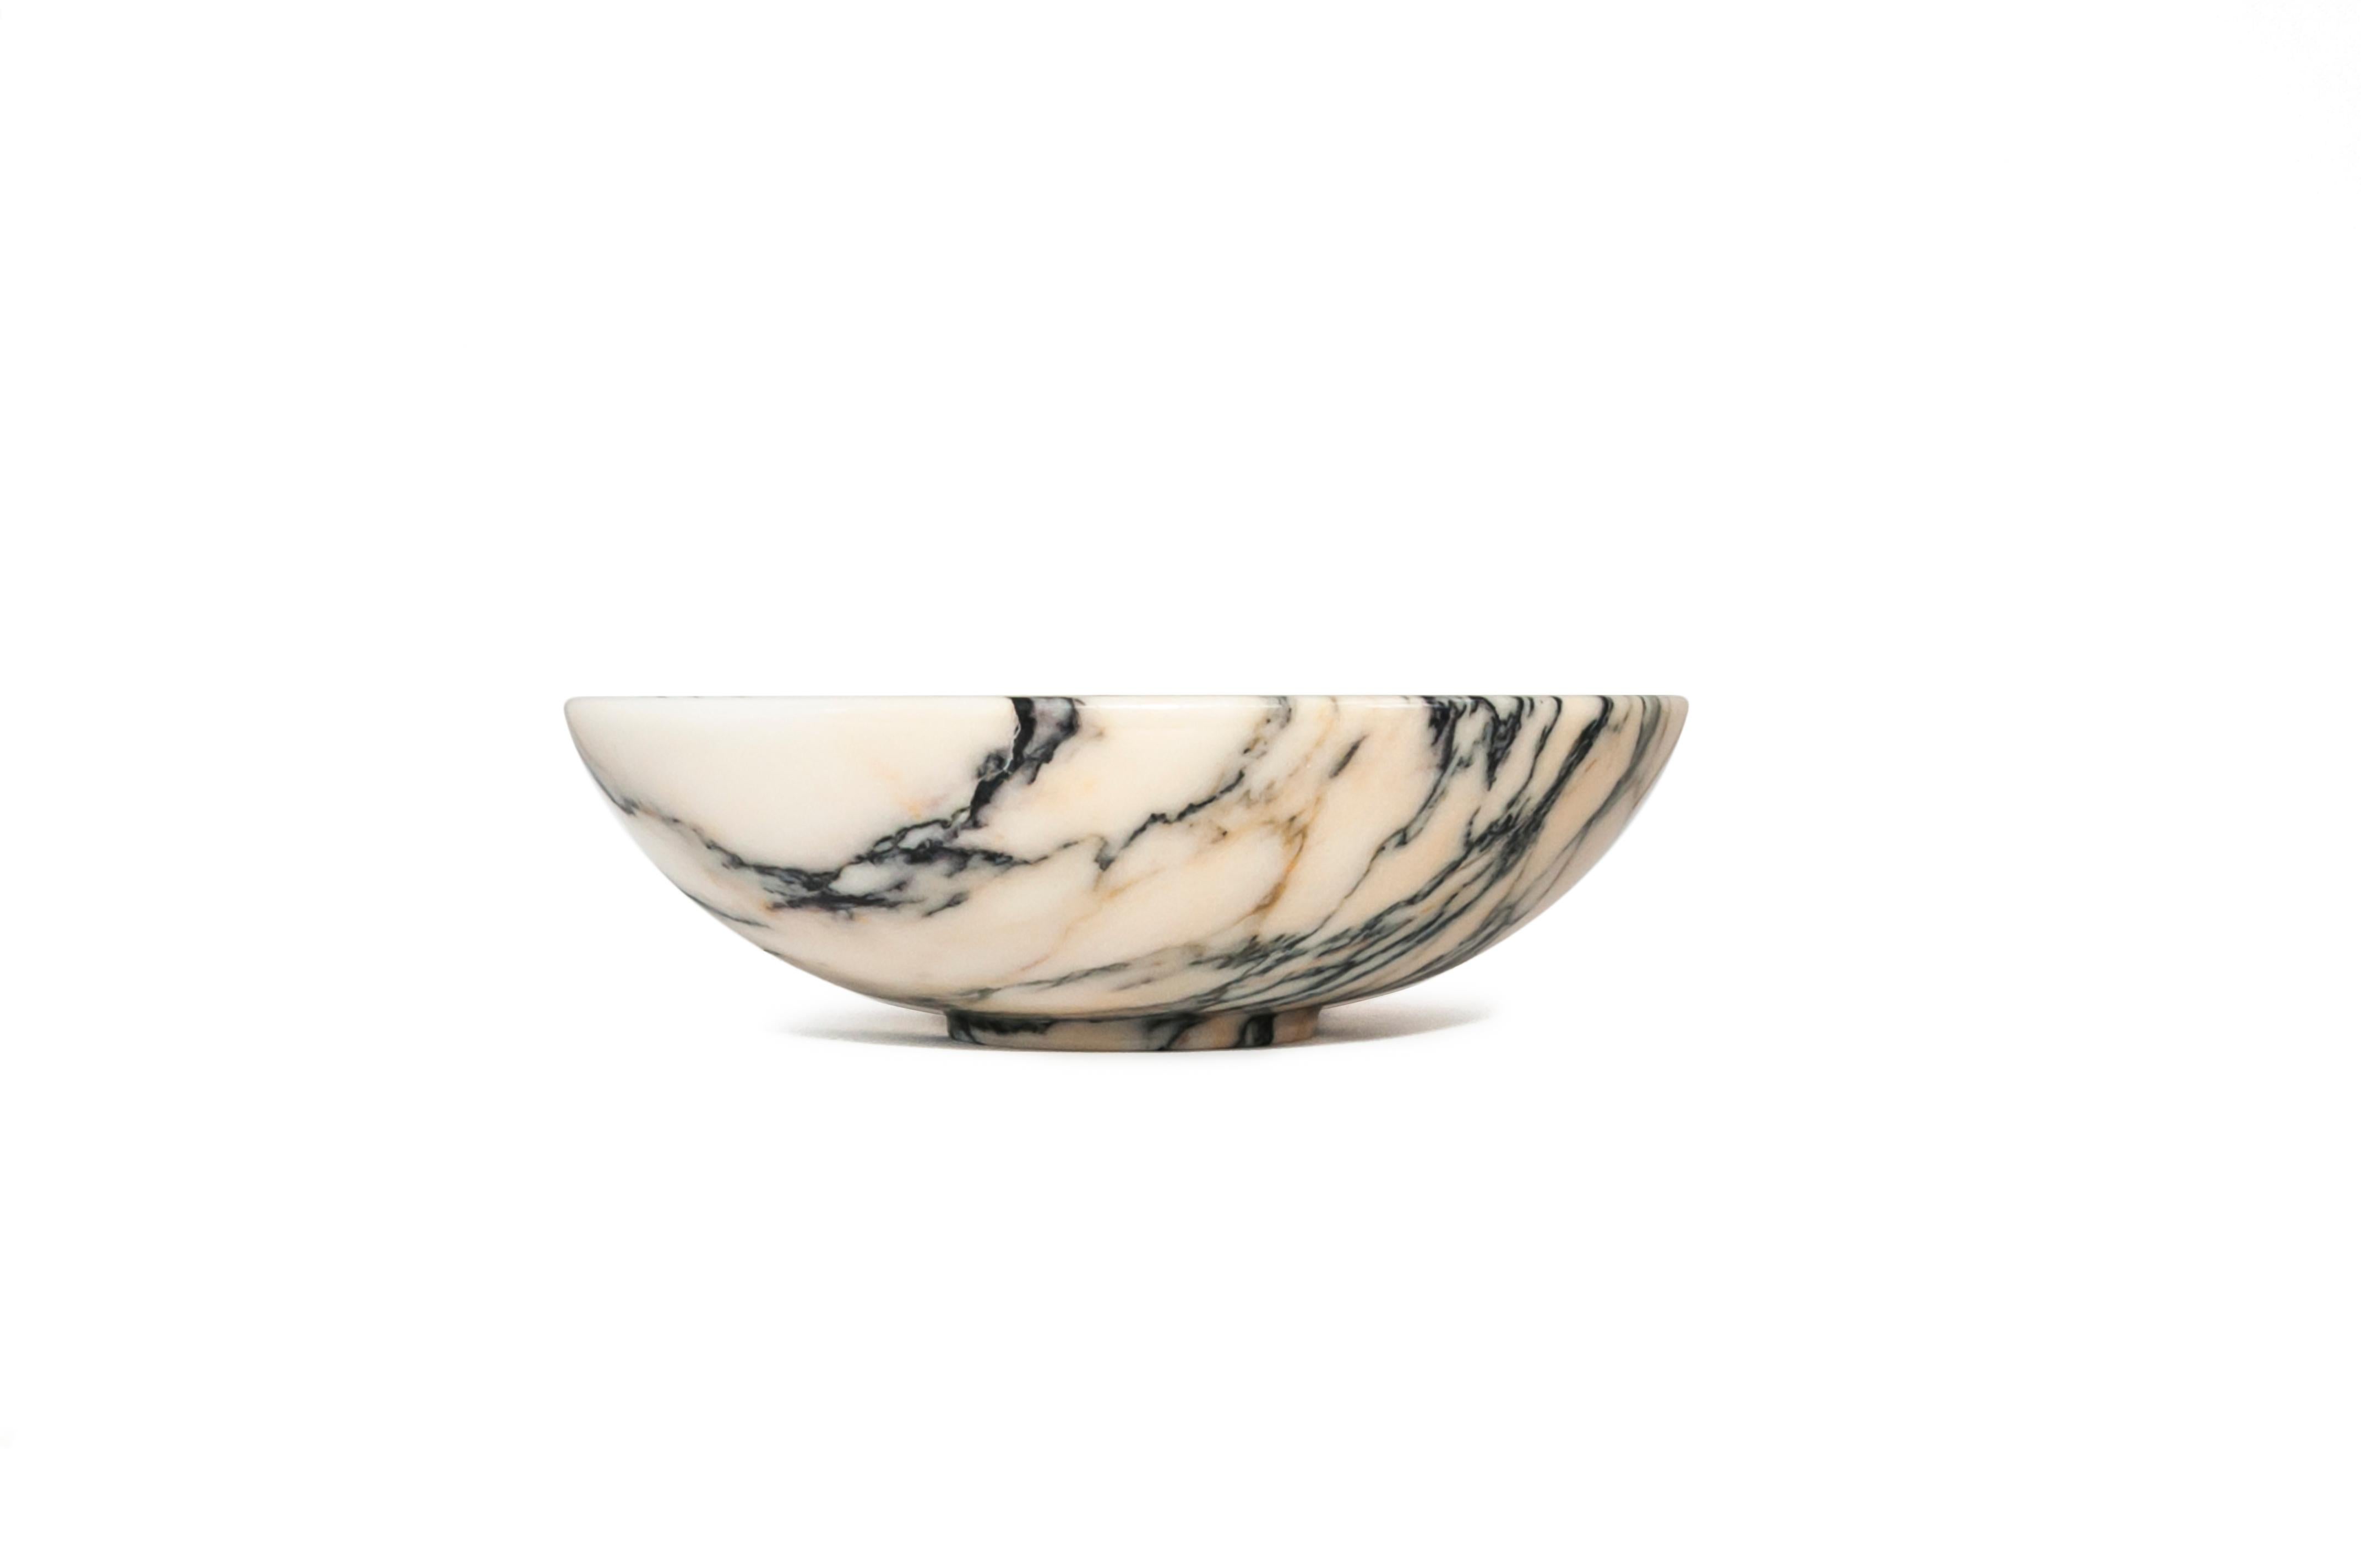 Customized bowl in Paonazzo marble honed height 11cm, 30cm diameter D 9cm, extracted and processed in Carrara, Italy. You have a 100% made in Italy product.
It is ideal for fruit and to present food.
Each piece is in a way unique (every marble